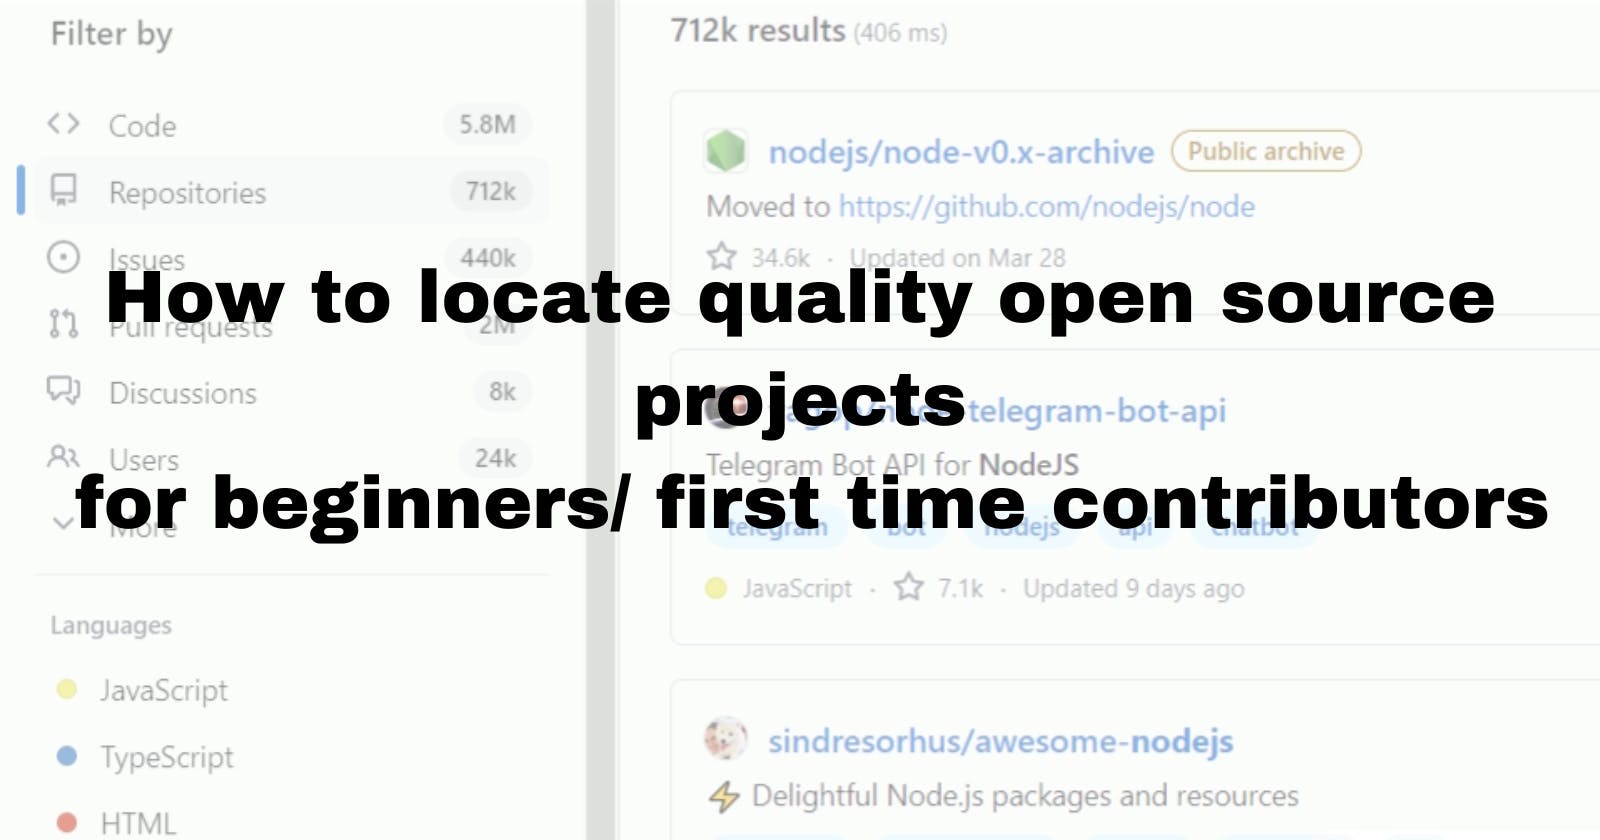 How to locate quality open source projects for First - time contributor